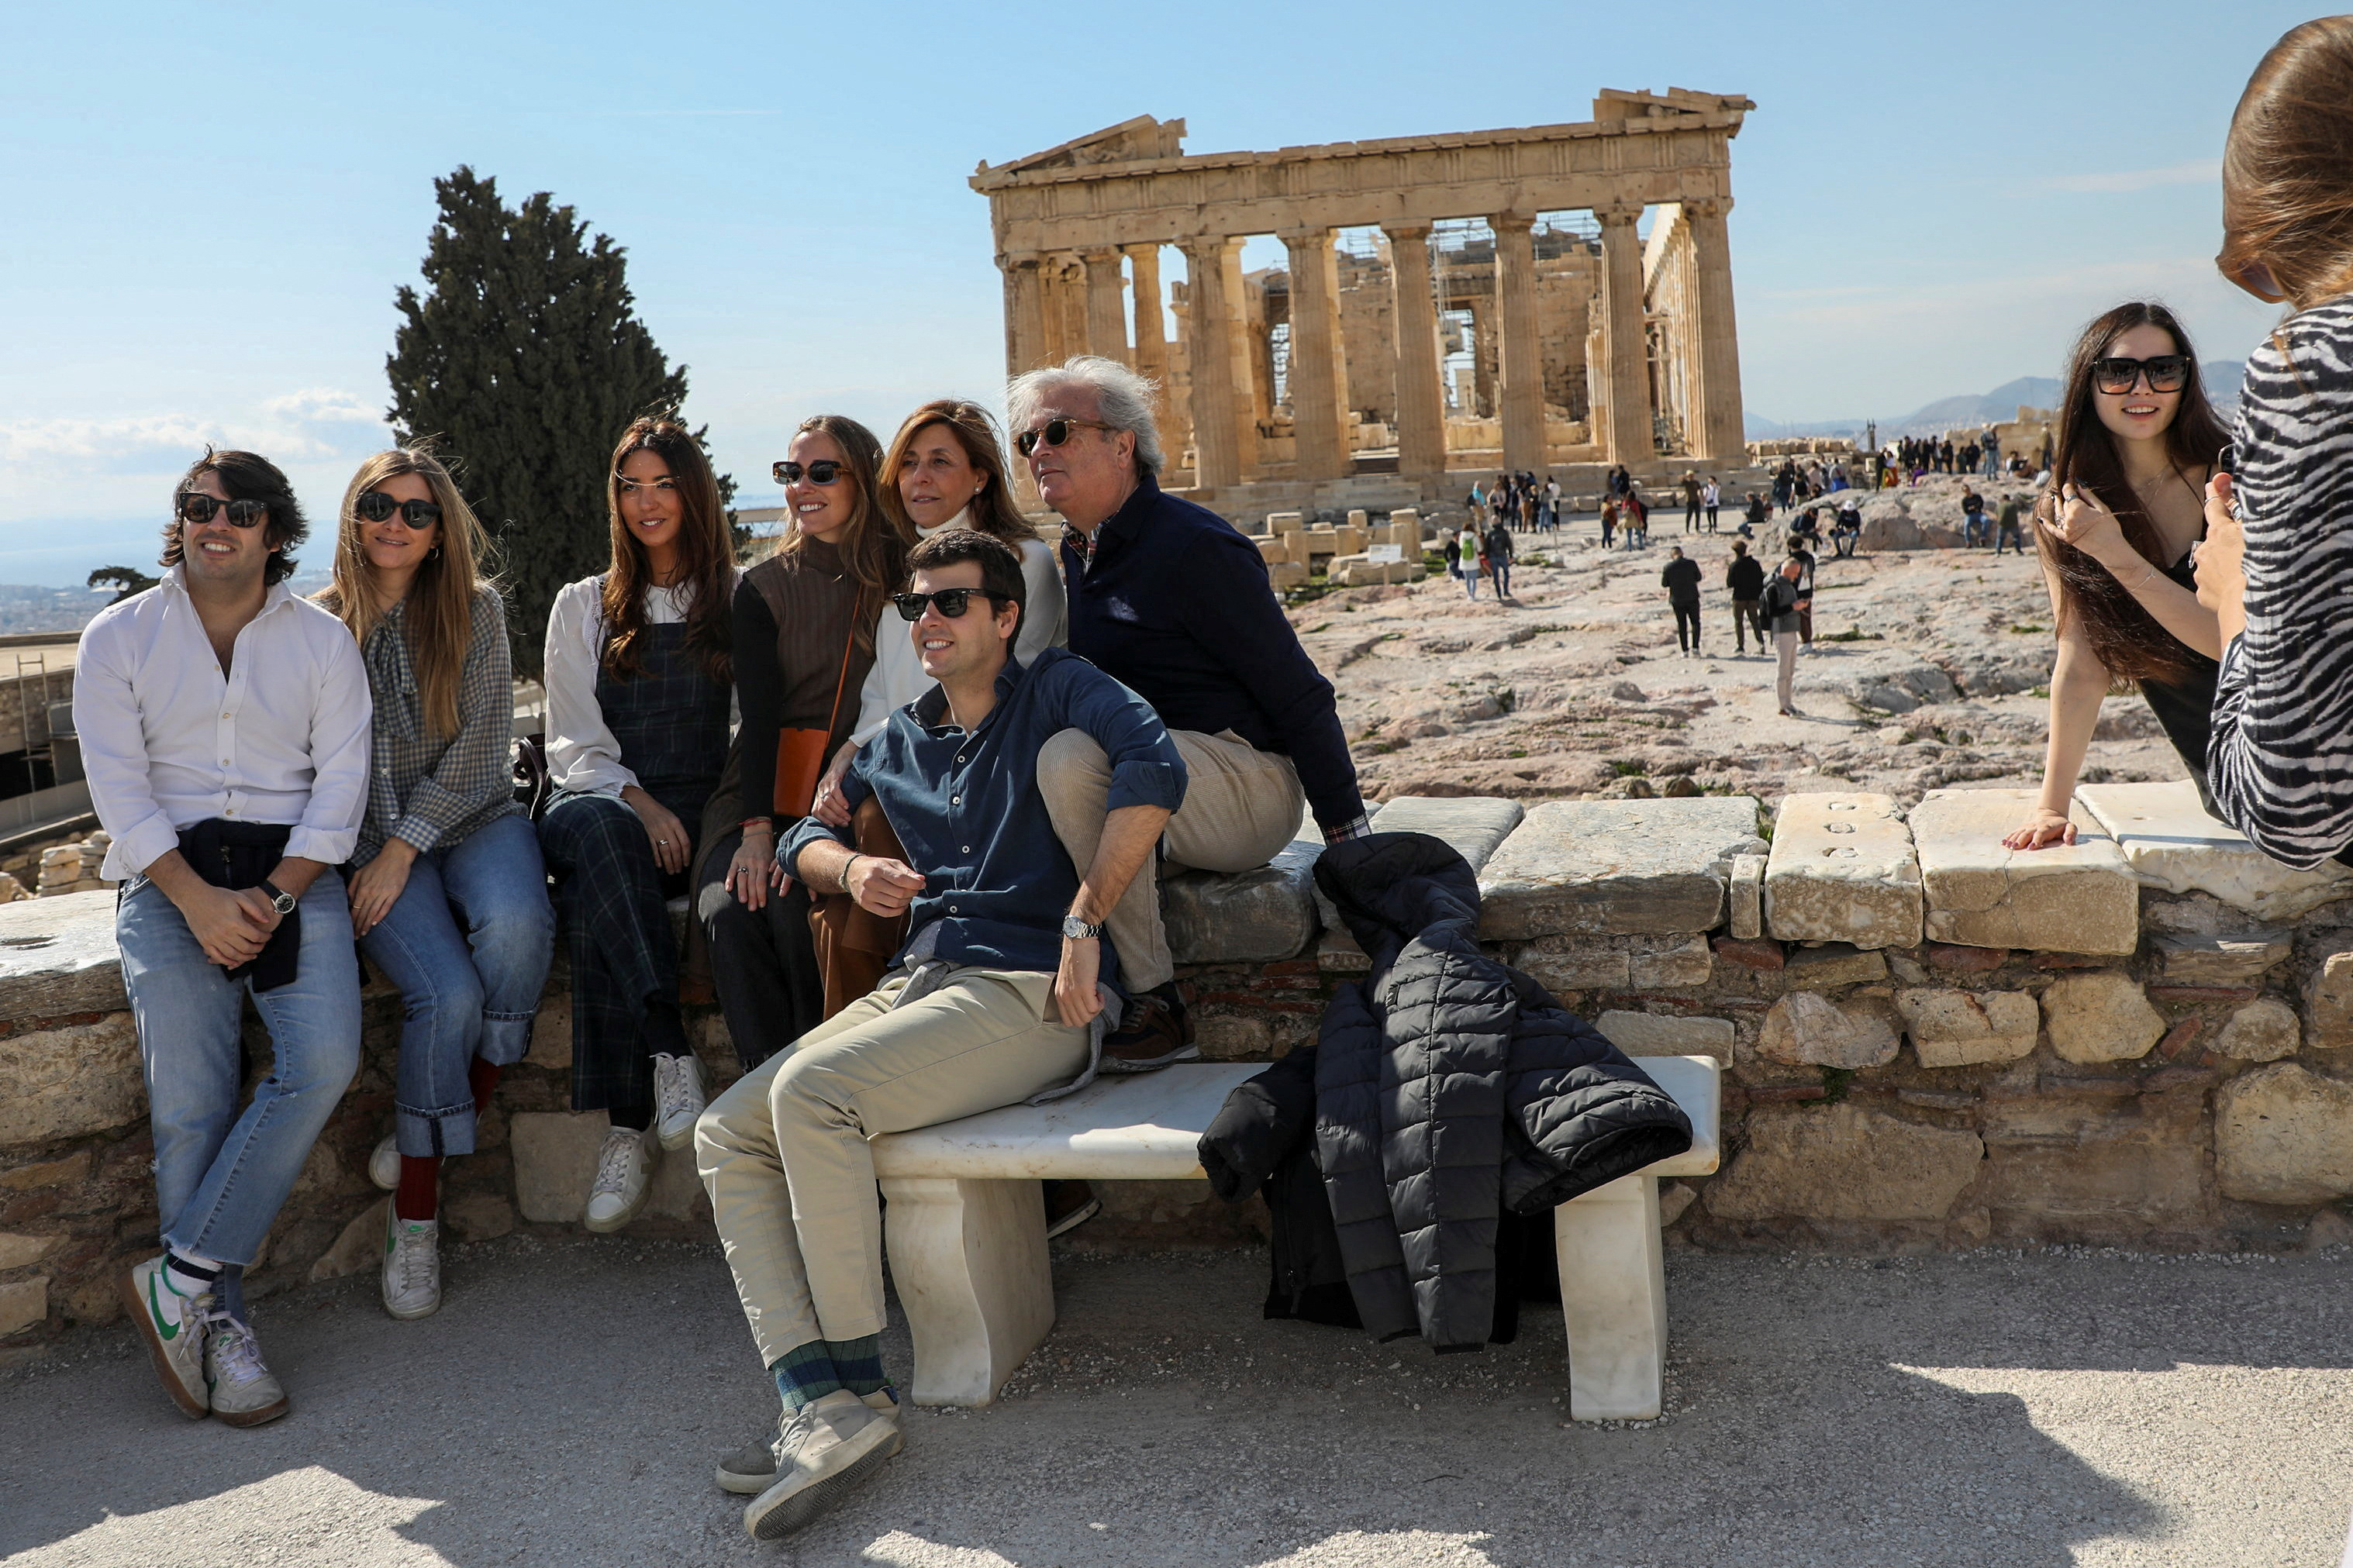 Visitors pose for a photo with the ancient Parthenon Temple seen in the background, atop the Acropolis hill archaeological site in Athens